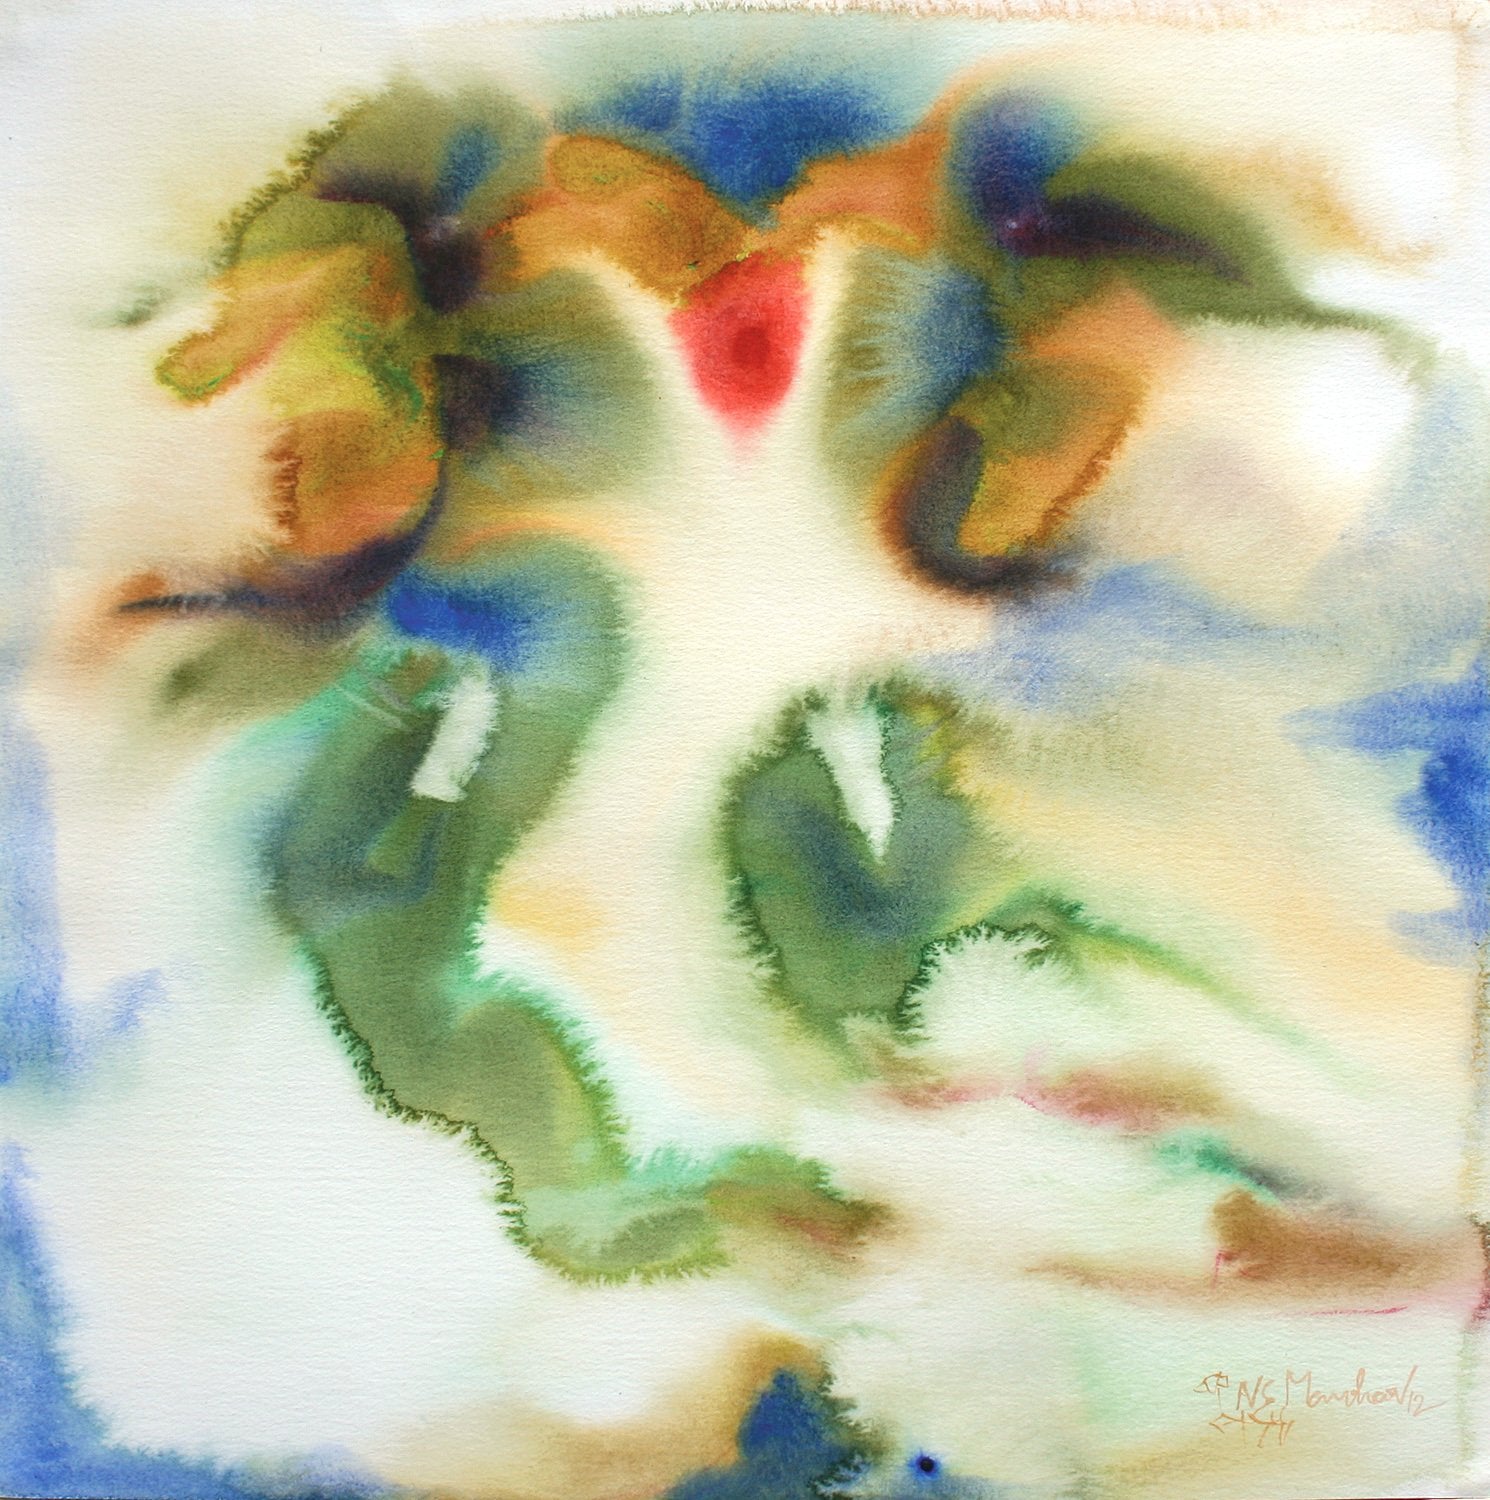 Ganesha 19|N.S. Manohar- Water colour on Board, 2012, 21.5 x 21.5 inches